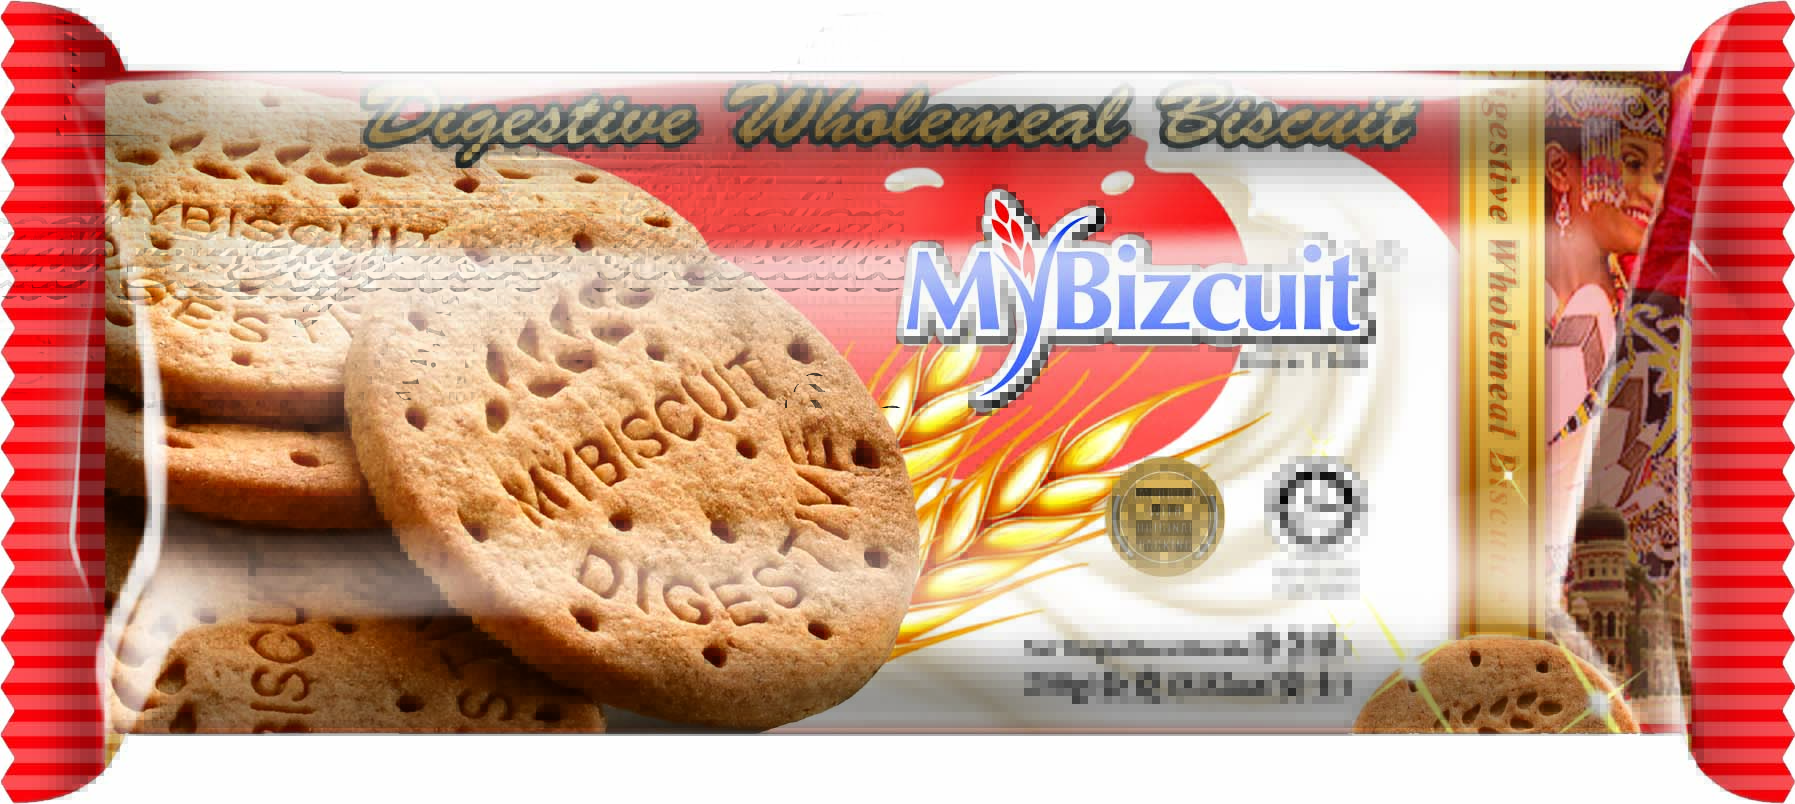 WD 01 - Digestives Wholemeal Biscuit (250 g Per Unit)